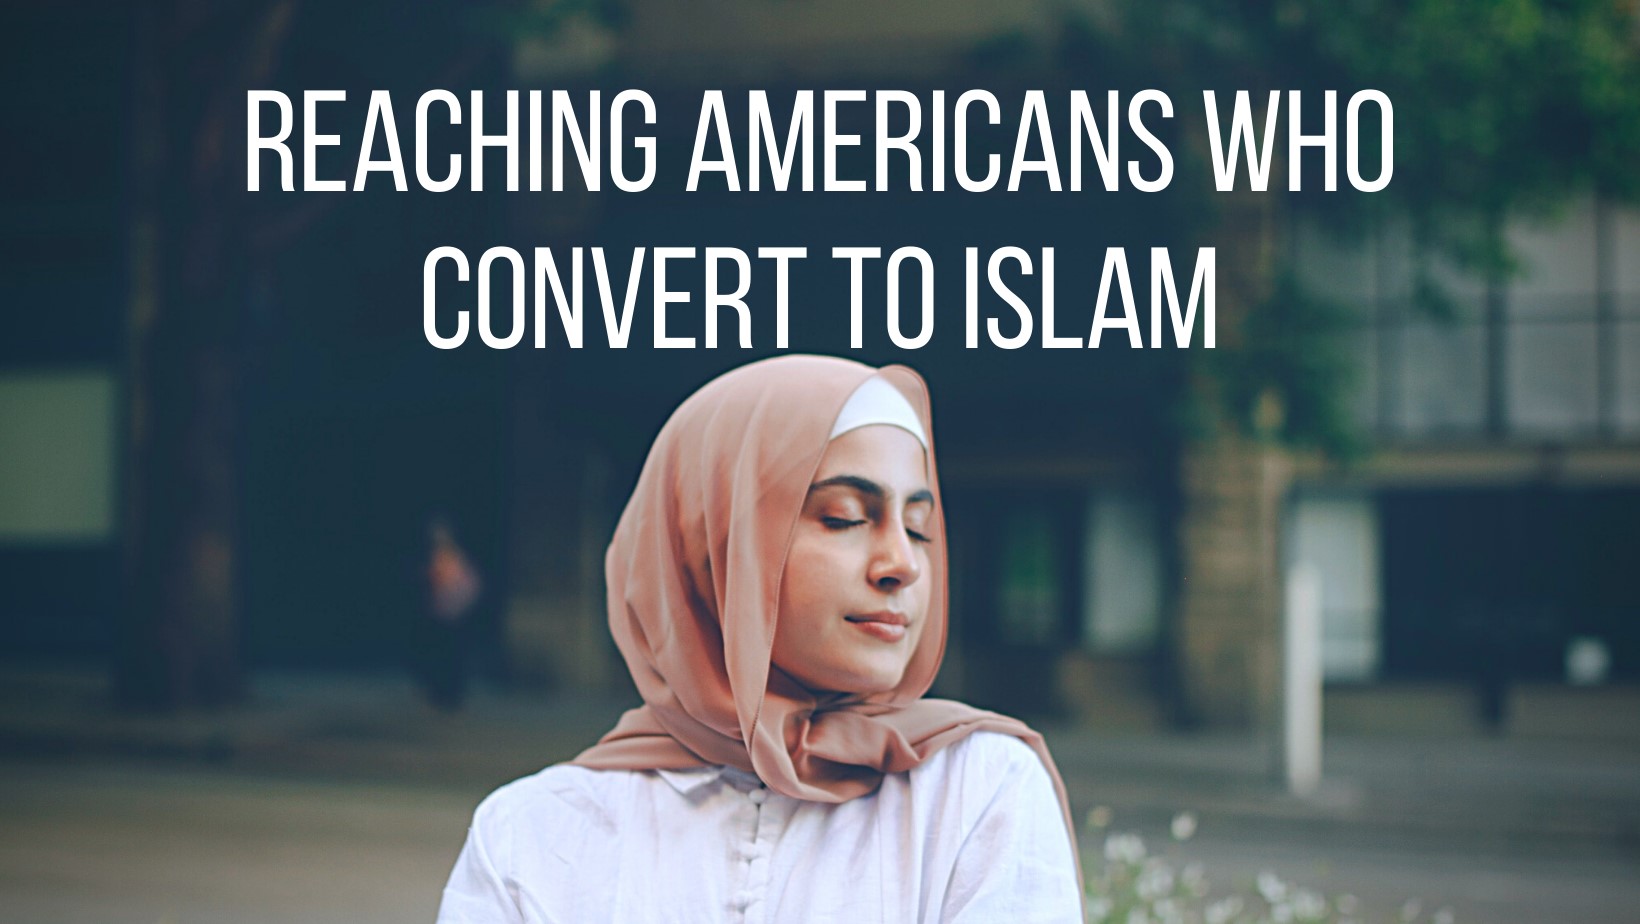 Reaching Americans who convert to Islam